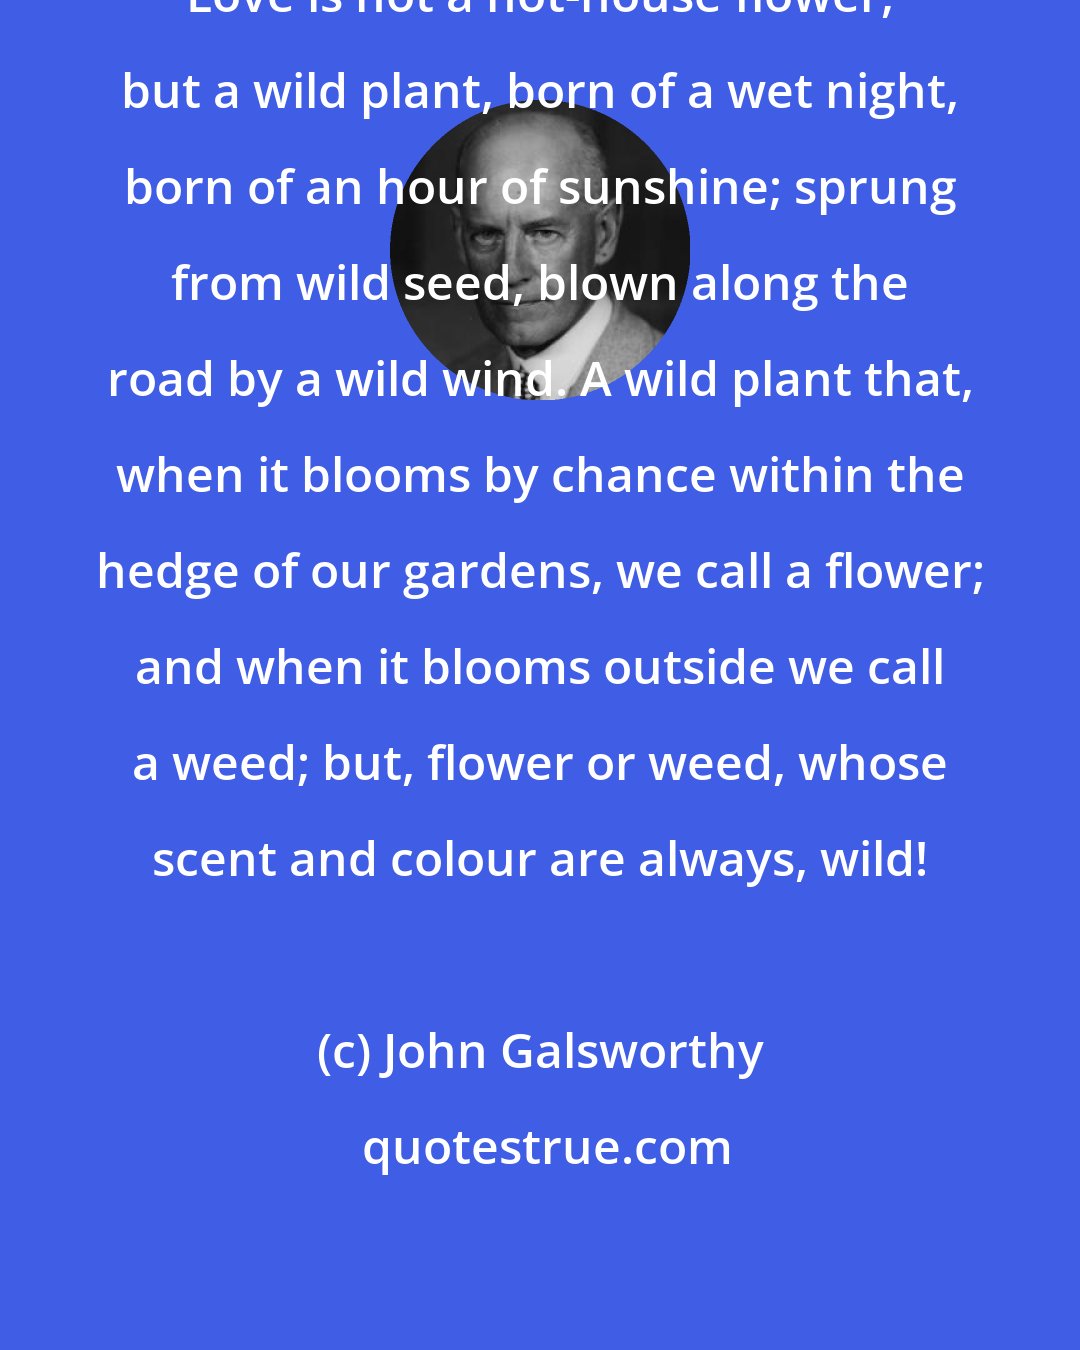 John Galsworthy: Love is not a hot-house flower, but a wild plant, born of a wet night, born of an hour of sunshine; sprung from wild seed, blown along the road by a wild wind. A wild plant that, when it blooms by chance within the hedge of our gardens, we call a flower; and when it blooms outside we call a weed; but, flower or weed, whose scent and colour are always, wild!